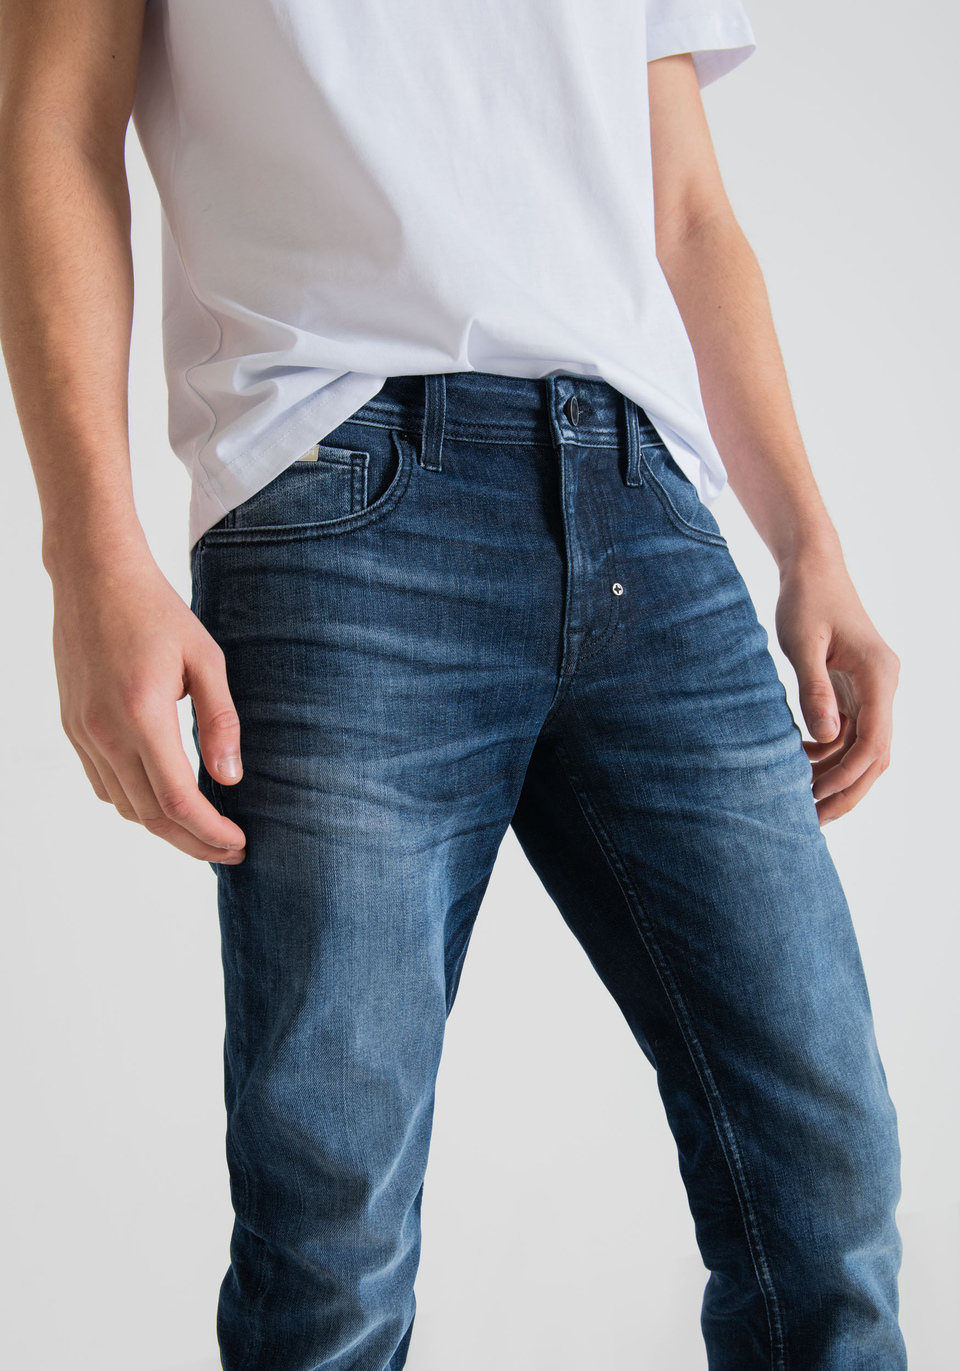 JEANS TAPERED FIT “OZZY” IN STRETCH DENIM SCURO - Antony Morato Online Shop